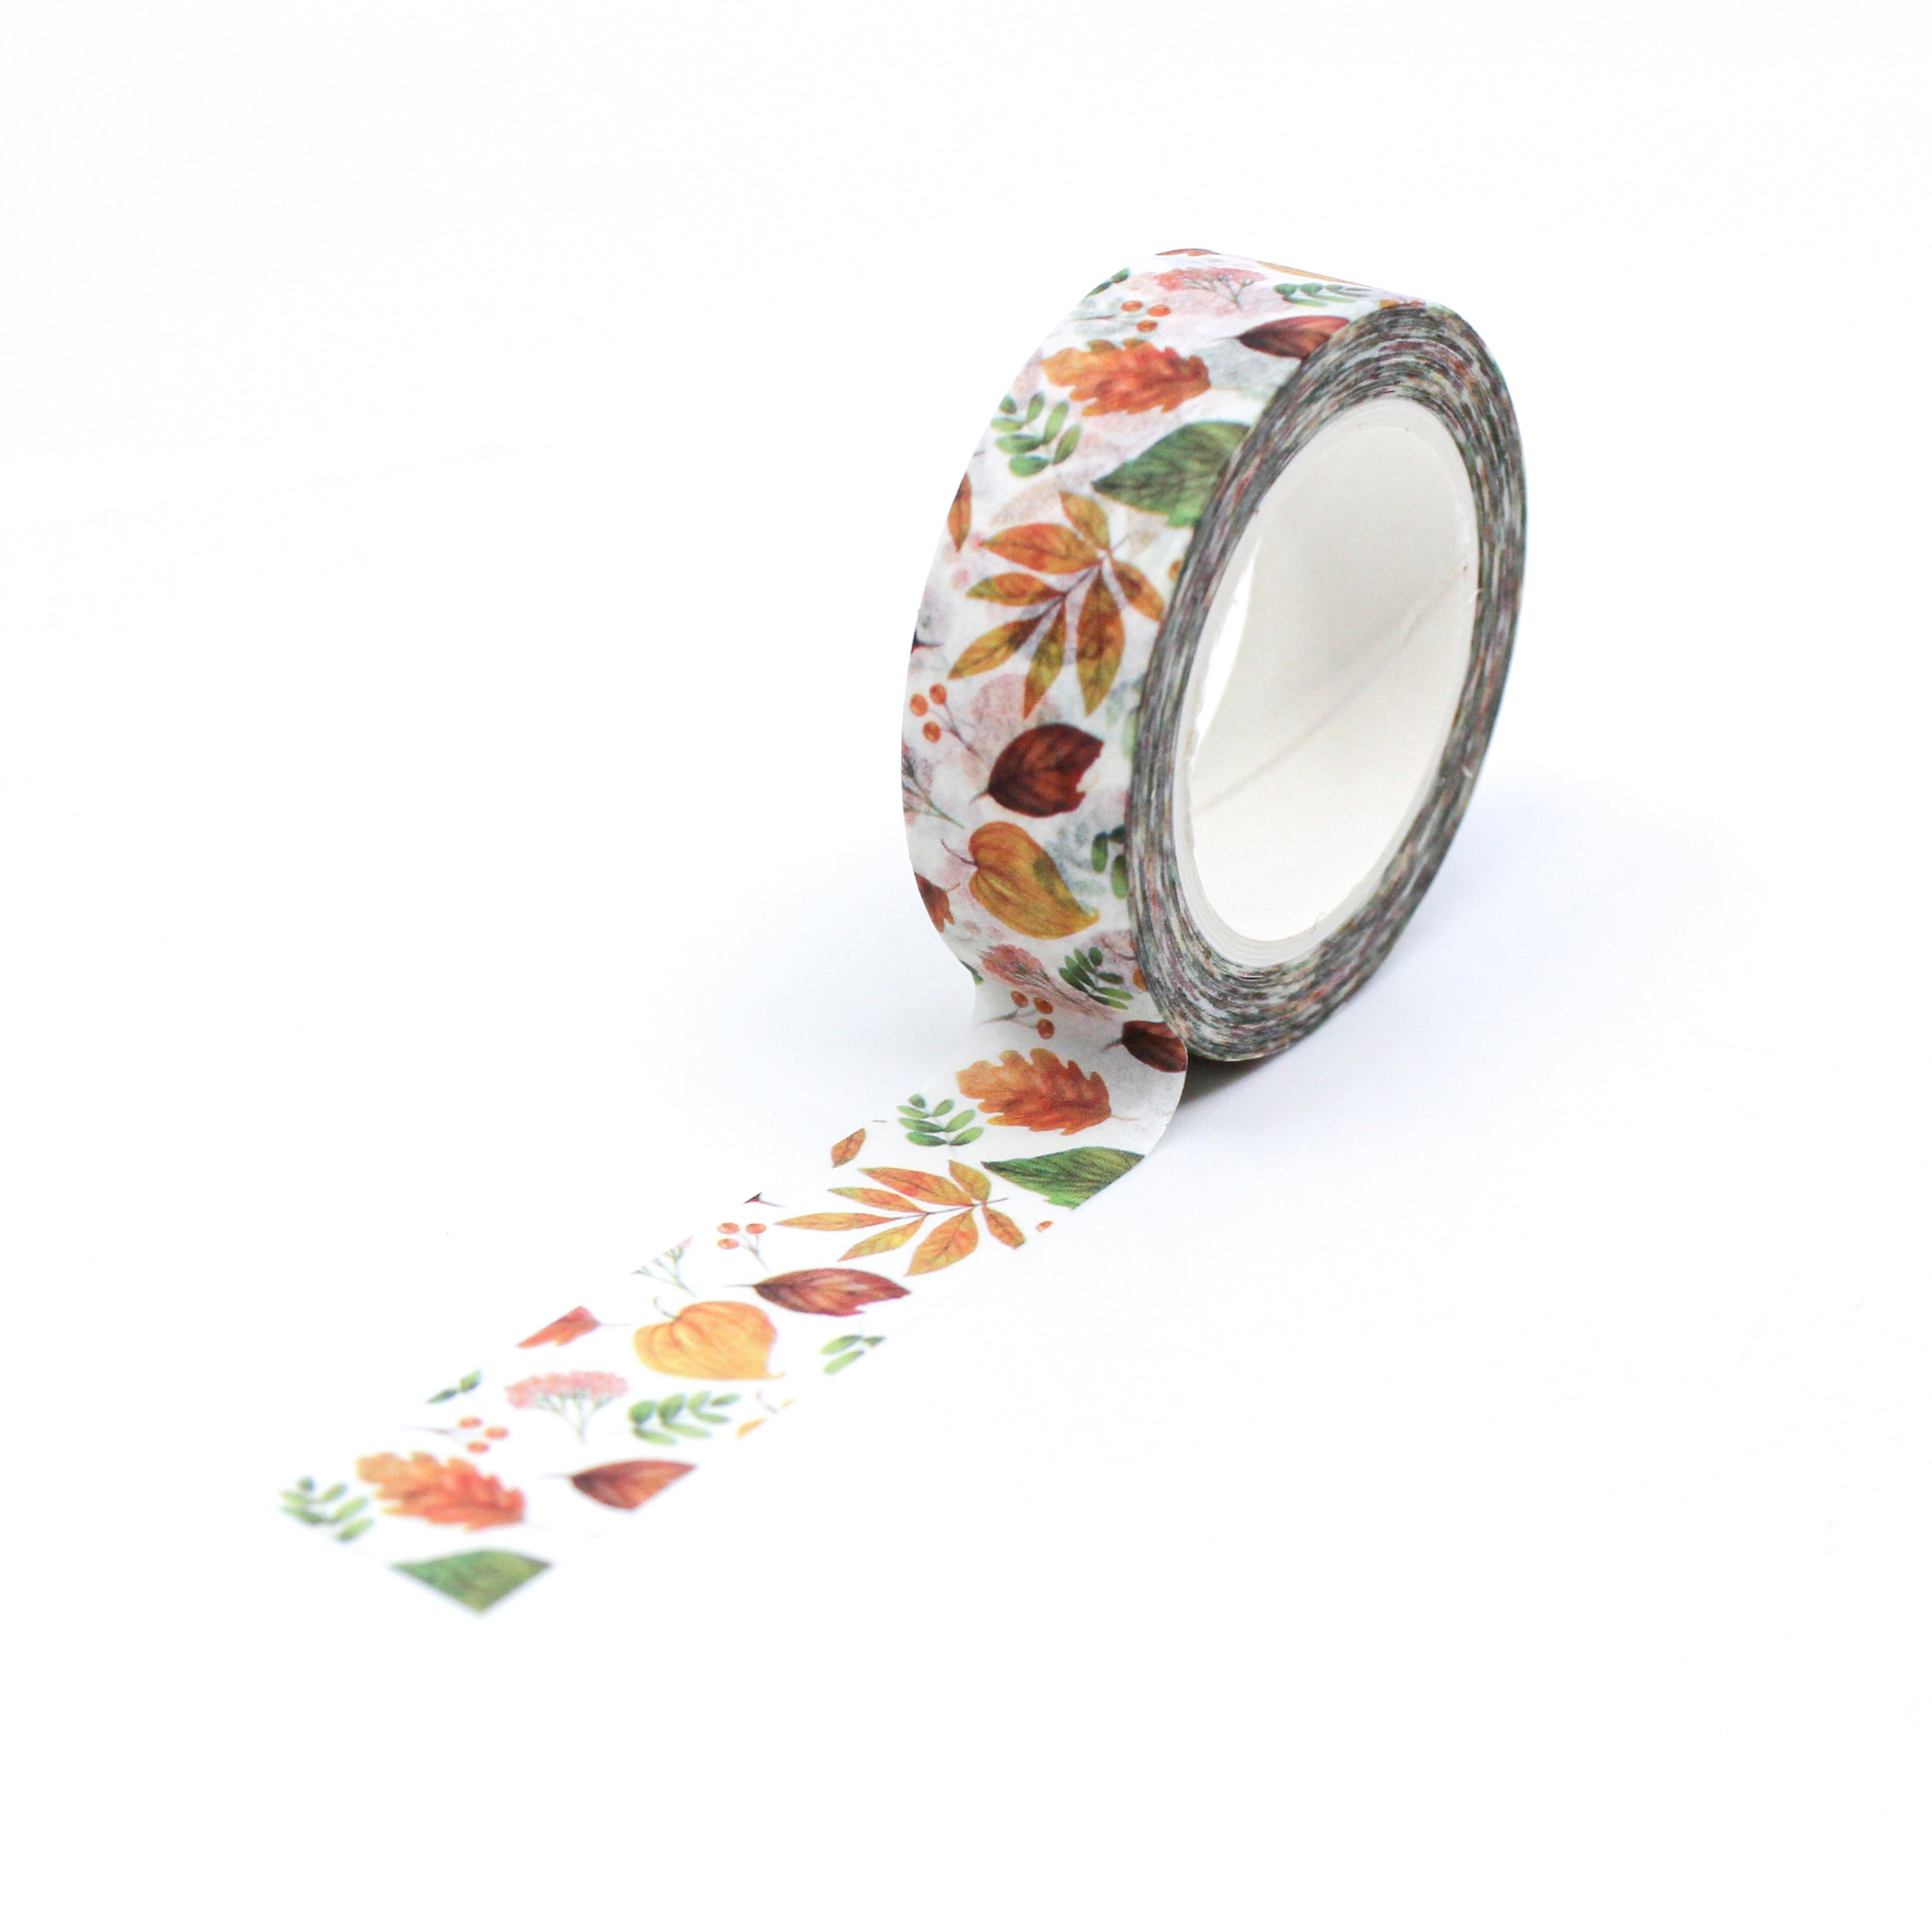 This is a repeat full view of cute fall thanksgiving leaf pattern washi tape from BBB Supplies Craft Shop